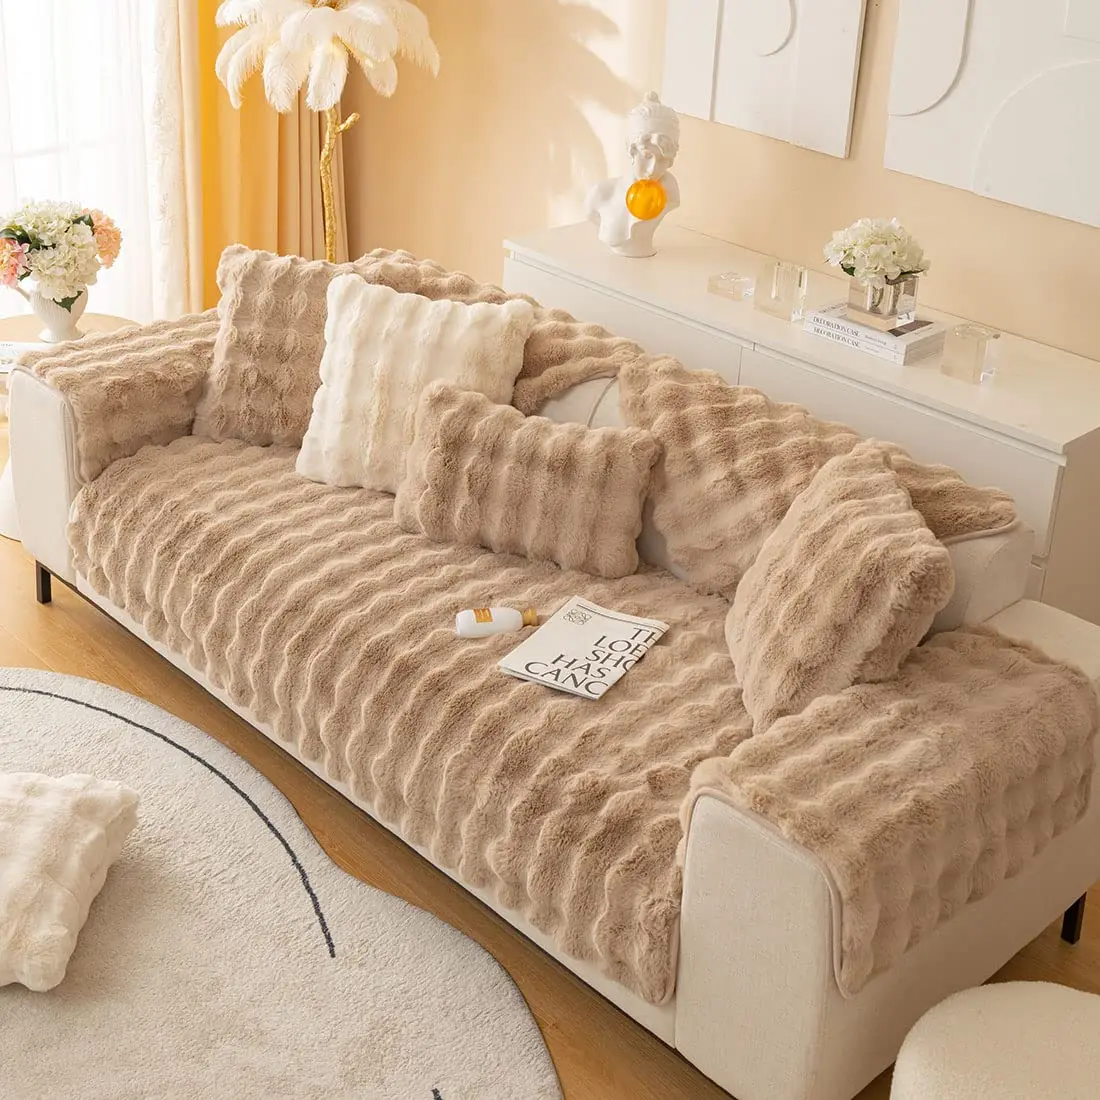 New Arrival Rabbit Plush Sofa Cover Removable Super Soft Couch Cover Sofa Mat